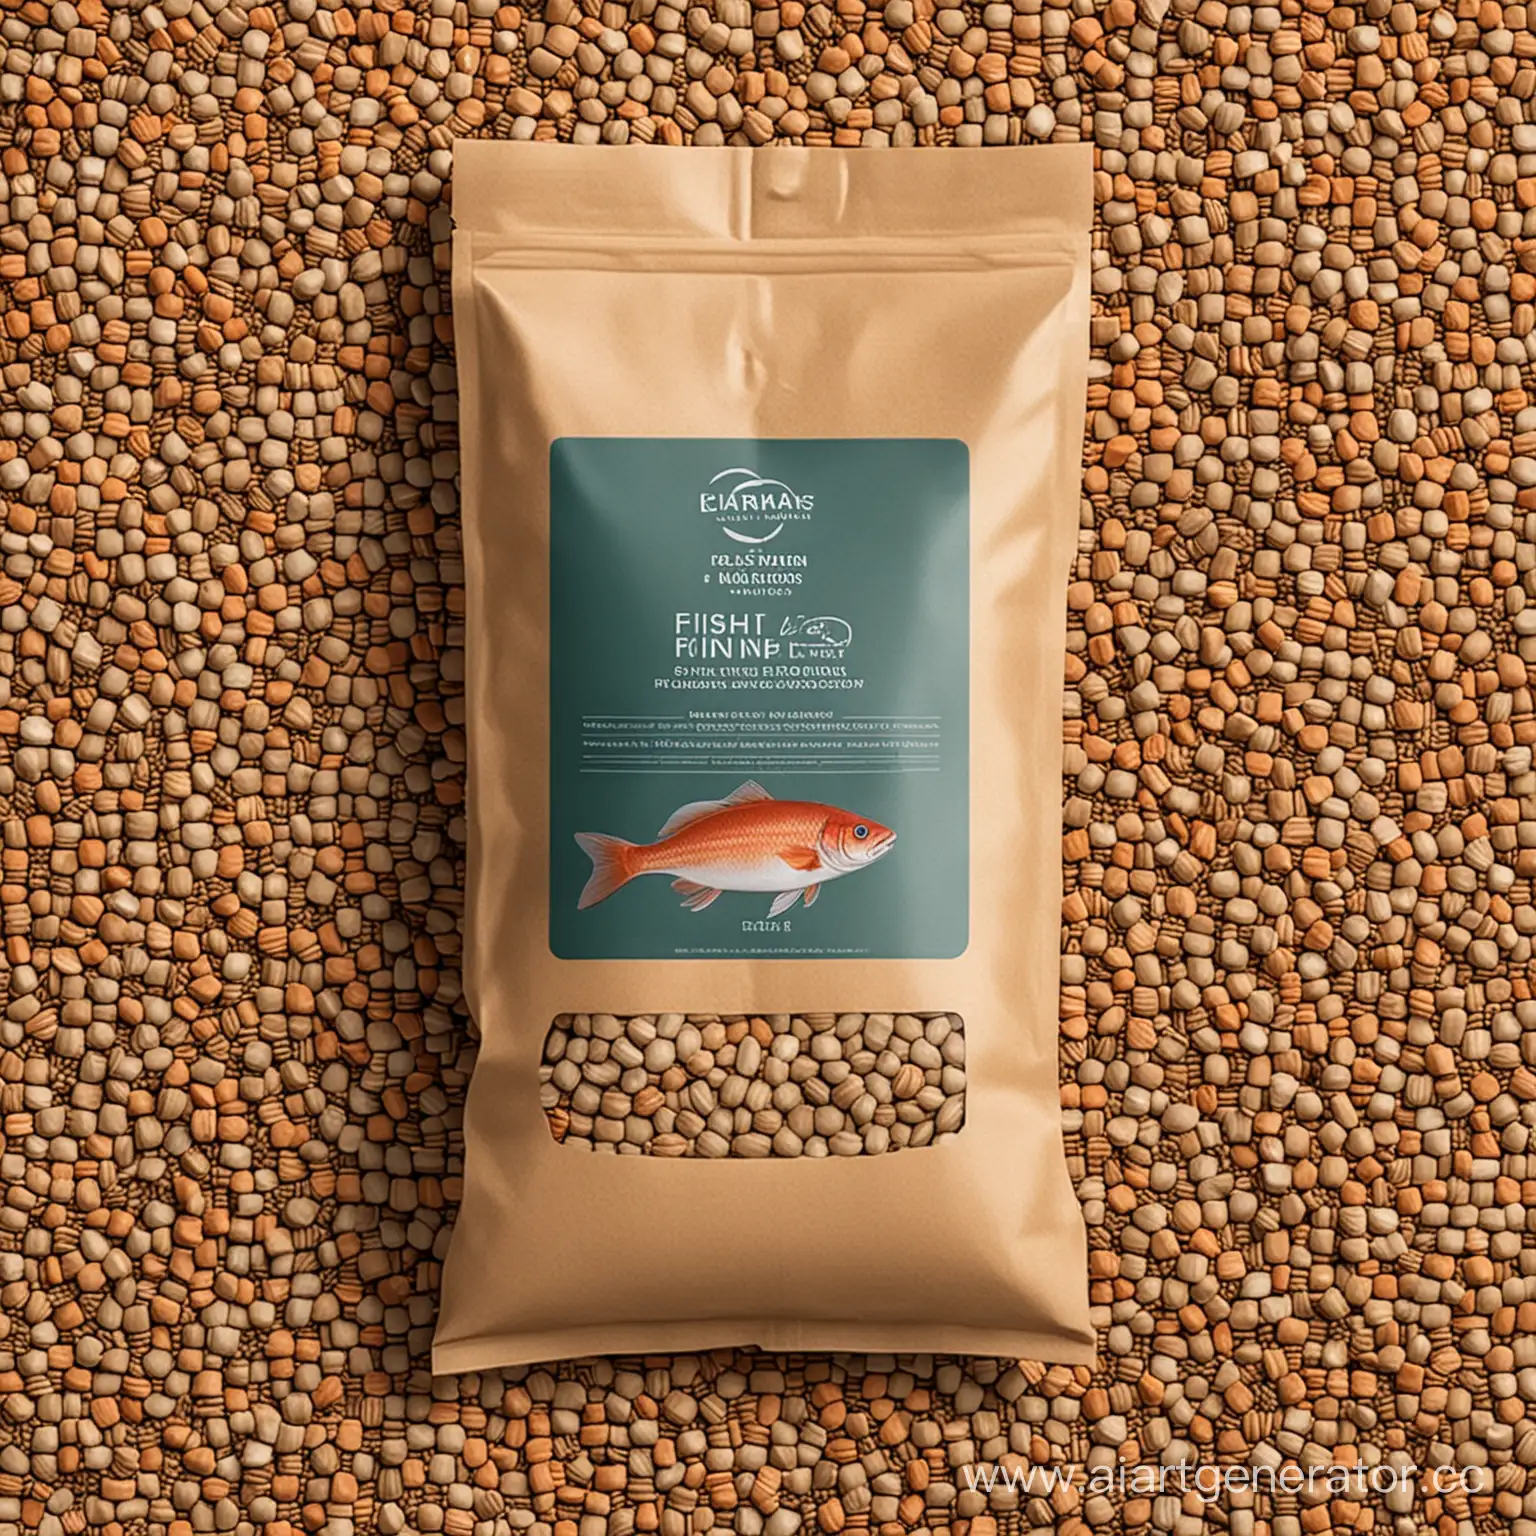 Colorful-Packaging-of-Premium-Fish-Feed-for-Aquatic-Pets